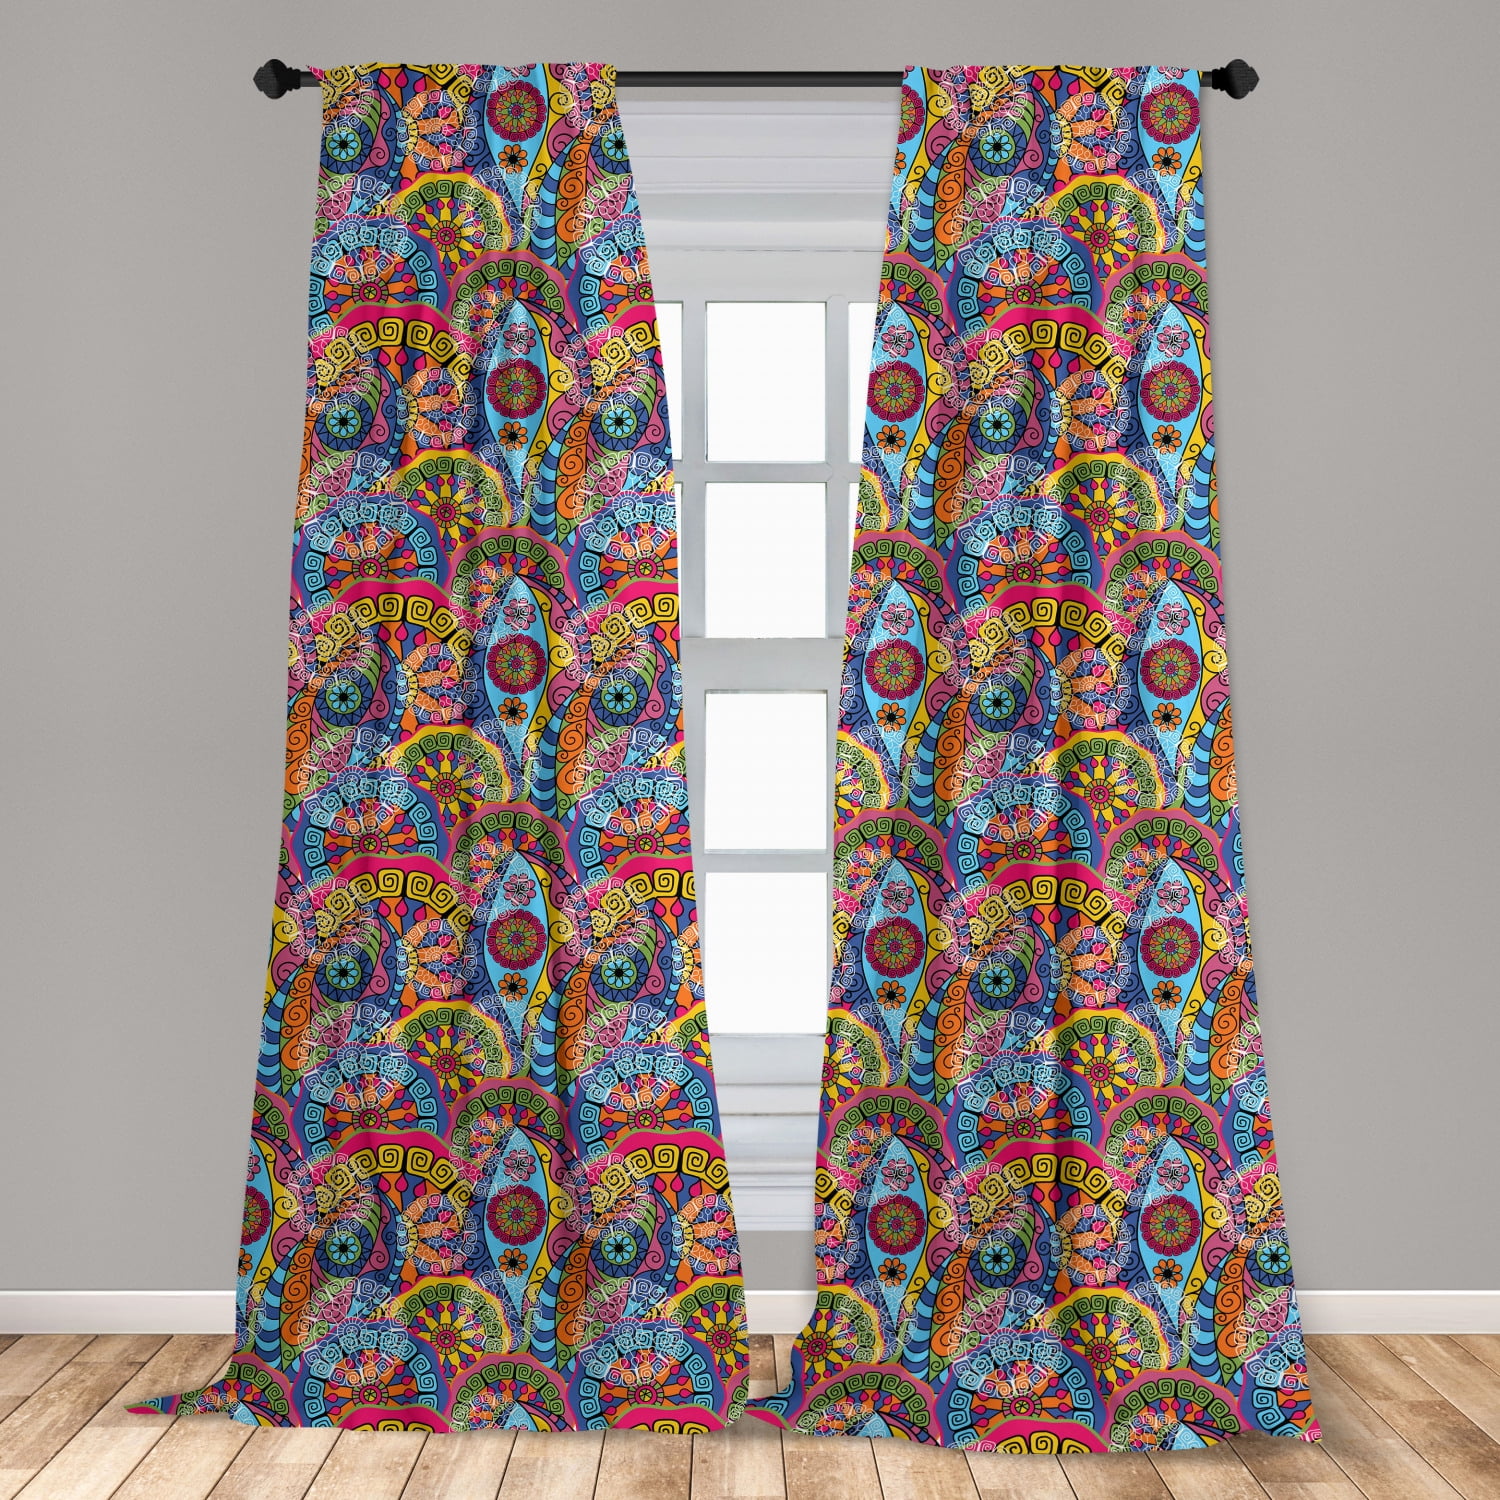 Details about   Hippie Window curtains Sky Beach Art Curtains for Living Room Bedroom Home Decor 